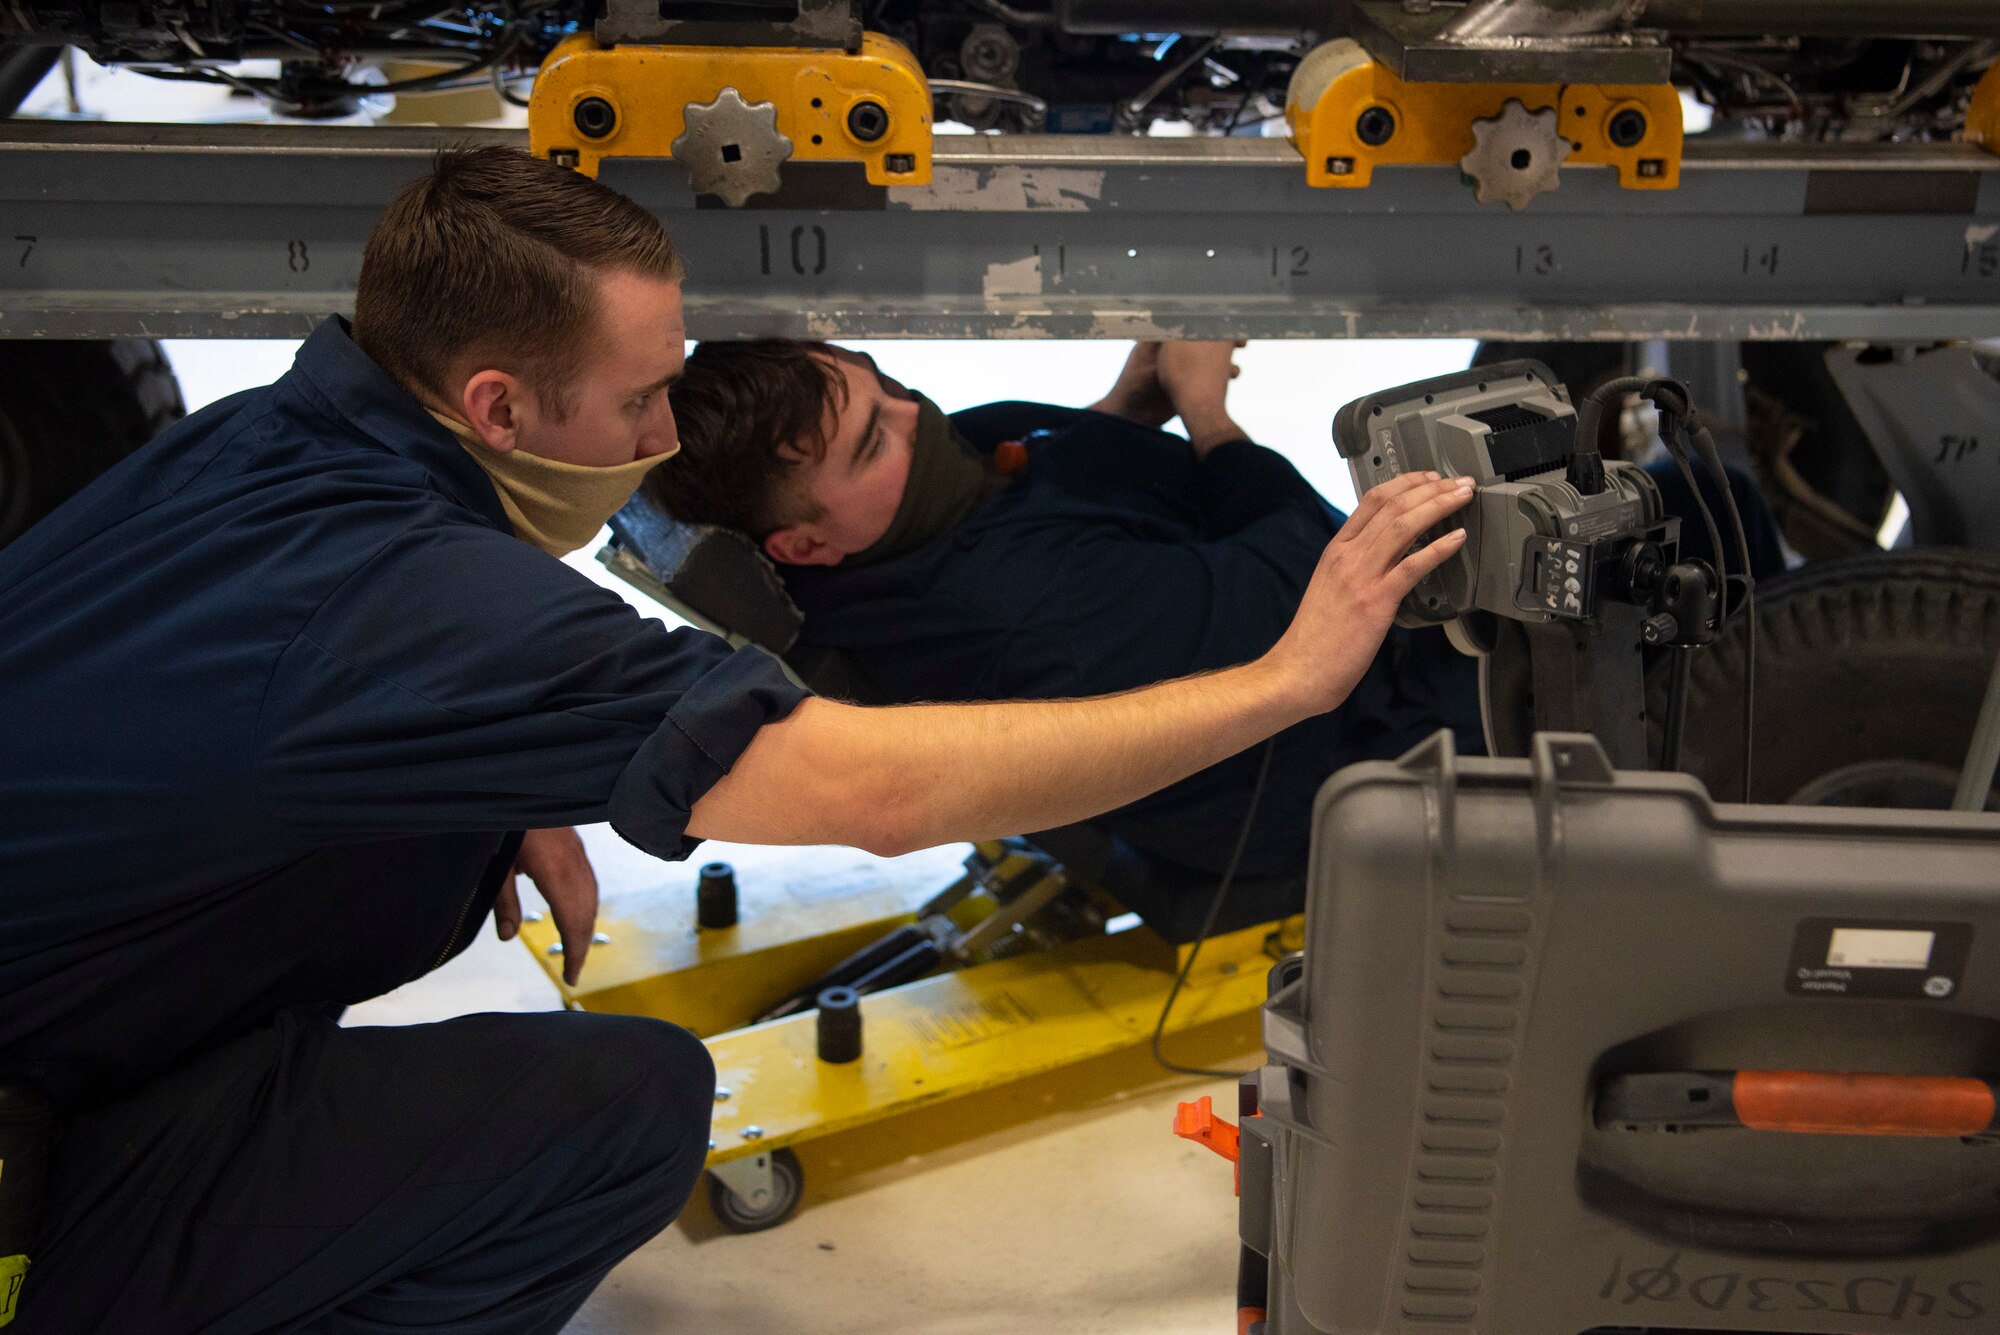 Senior Airman Steven Martin, left, and Staff Sgt. James Leonard, 49th Component Maintenance Squadron jet engine intermediate maintenance craftsmen, use a borescope to inspect narrow and hard-to-reach areas inside a F-16 Viper engine, May 13, 2021, on Holloman Air Force Base, New Mexico. The 49th CMS provides on and off-equipment maintenance support for assigned F-16 aircraft enabling Combat Air Force pilot training. (U.S. Air Force photo by Airman 1st Class Jessica Sanchez)